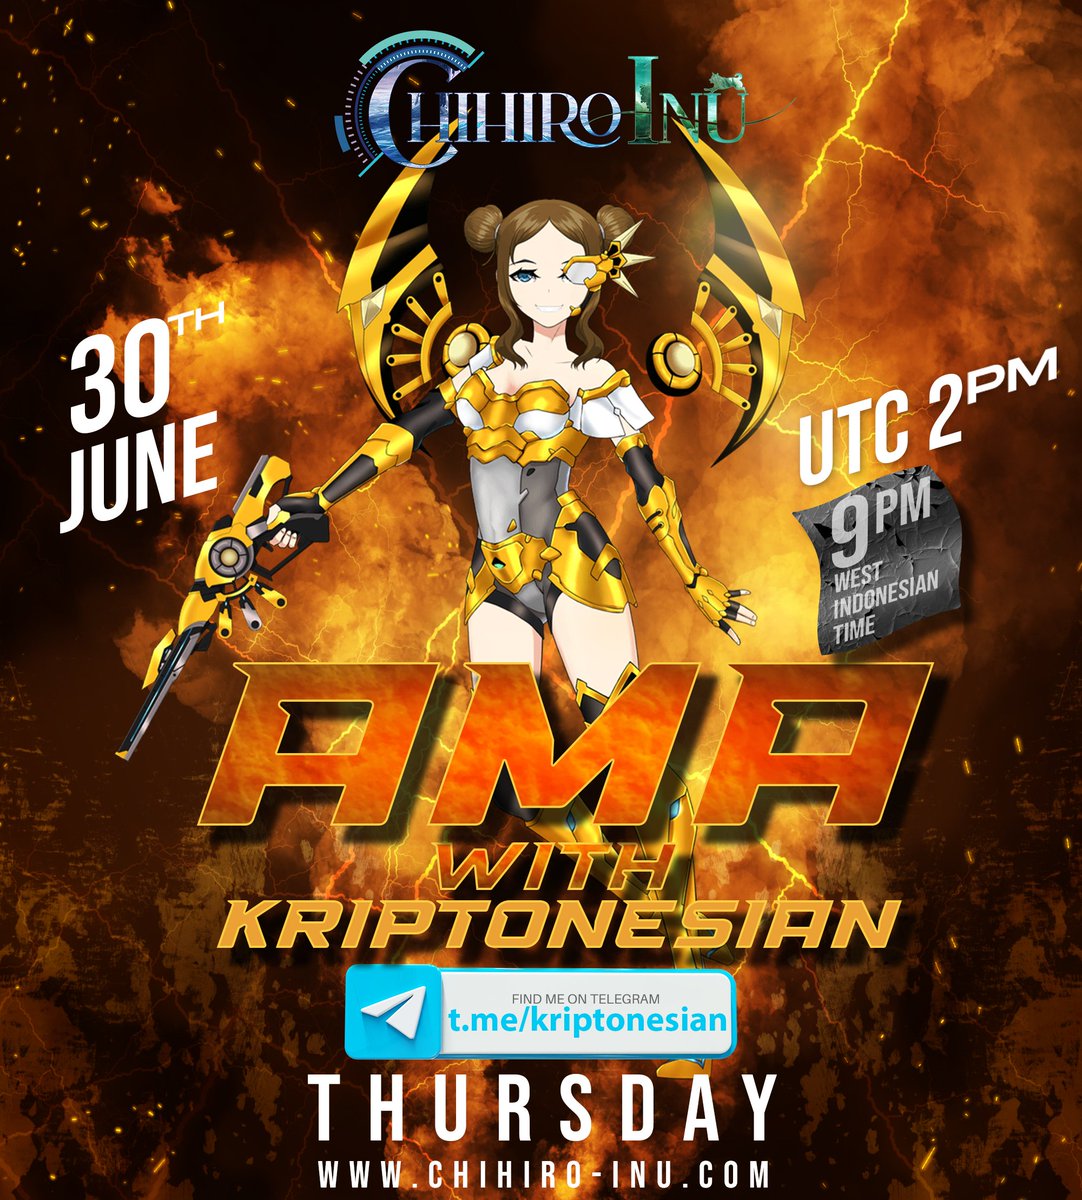 Who's excited for our next AMA with 
kriptonesian.id

Set the reminder!
📆 June, 30th 2022
🕥 UTC 2PM
🏡 Telegram space

Telegram : t.me/kriptonesian 

See you soon!
#ChihiroInu #ChiroArmy #Play2Earn #GameFi #DAOCommunity #chihiroinueth